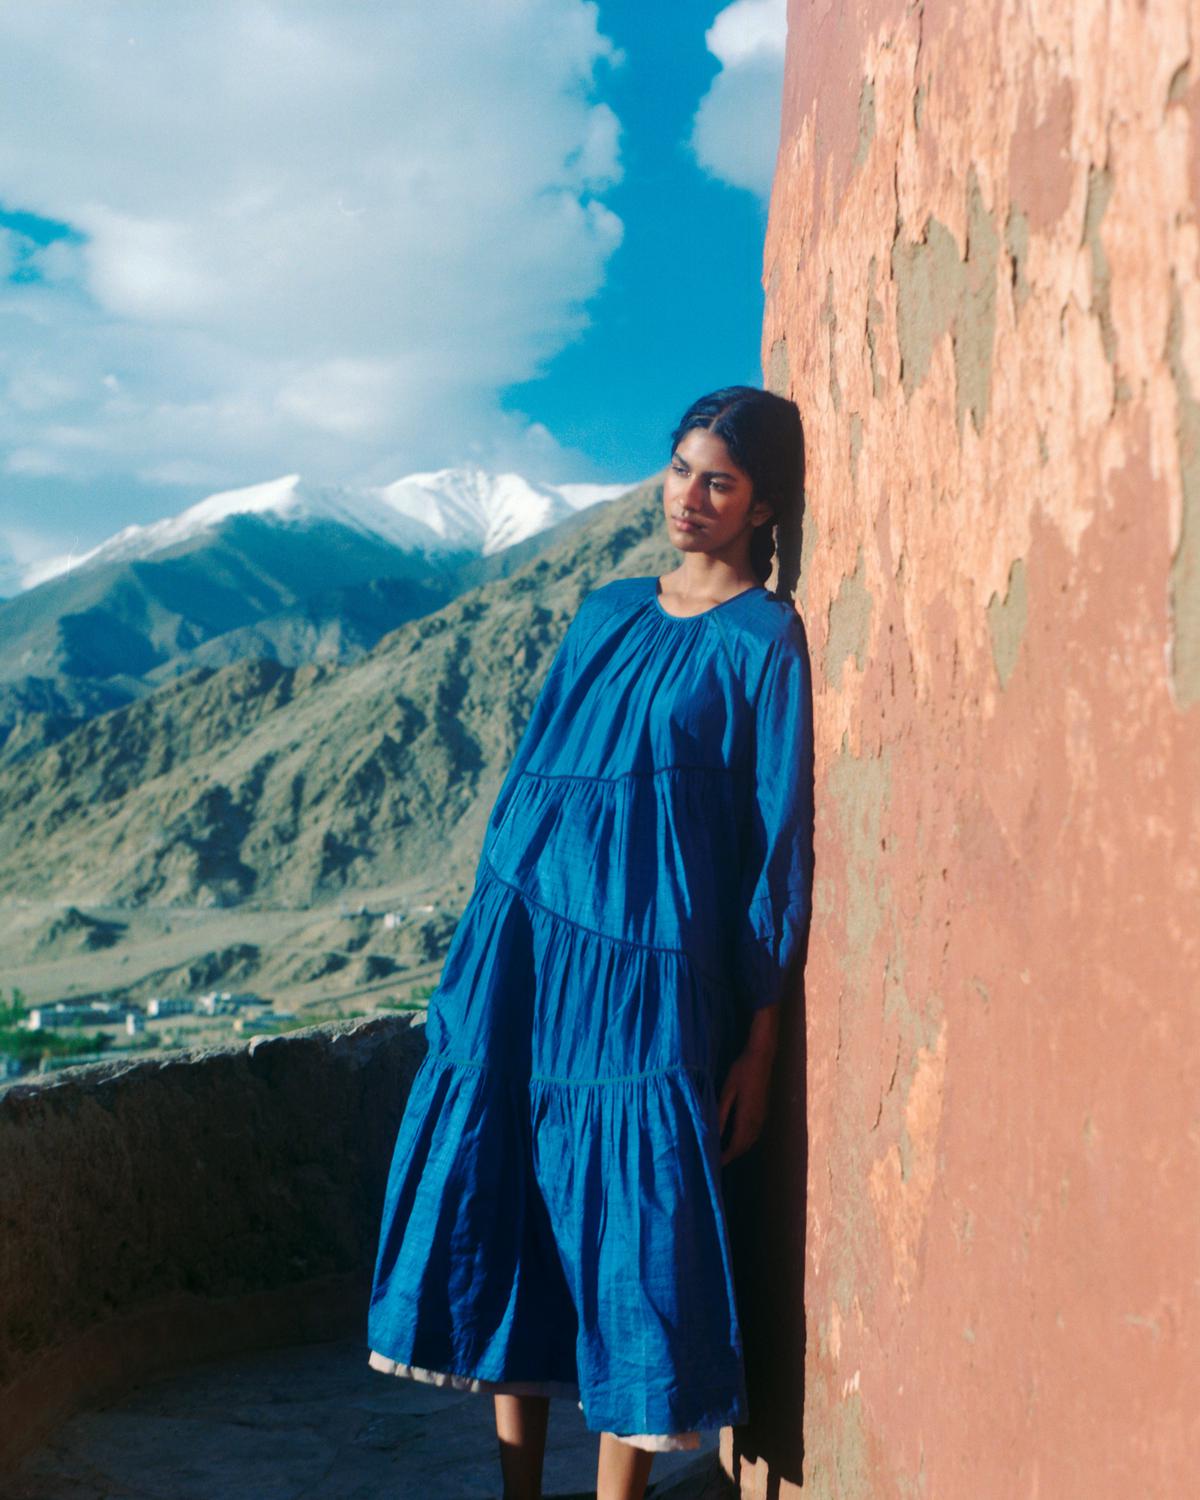 Eka’s AW collection is inspired by Ladakh